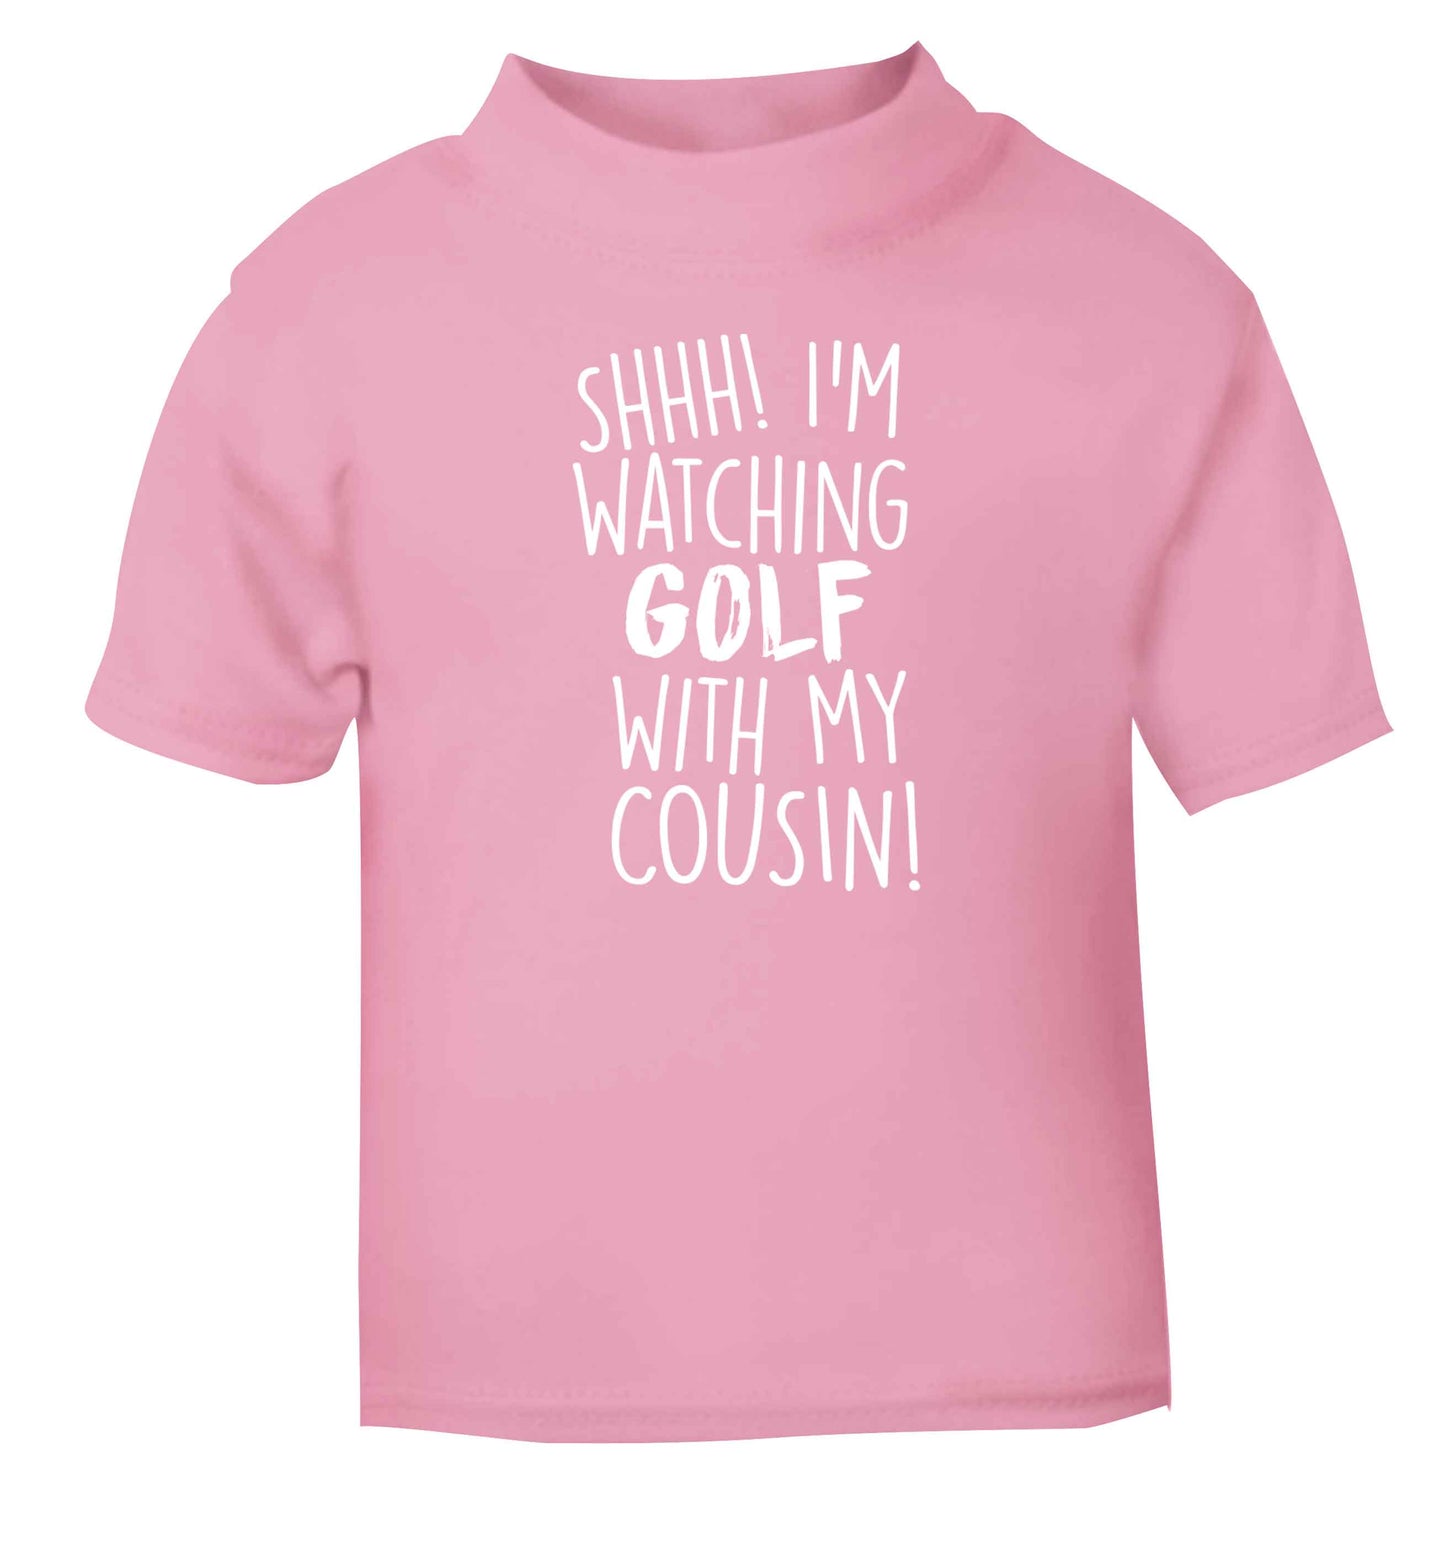 Shh I'm watching golf with my cousin light pink Baby Toddler Tshirt 2 Years